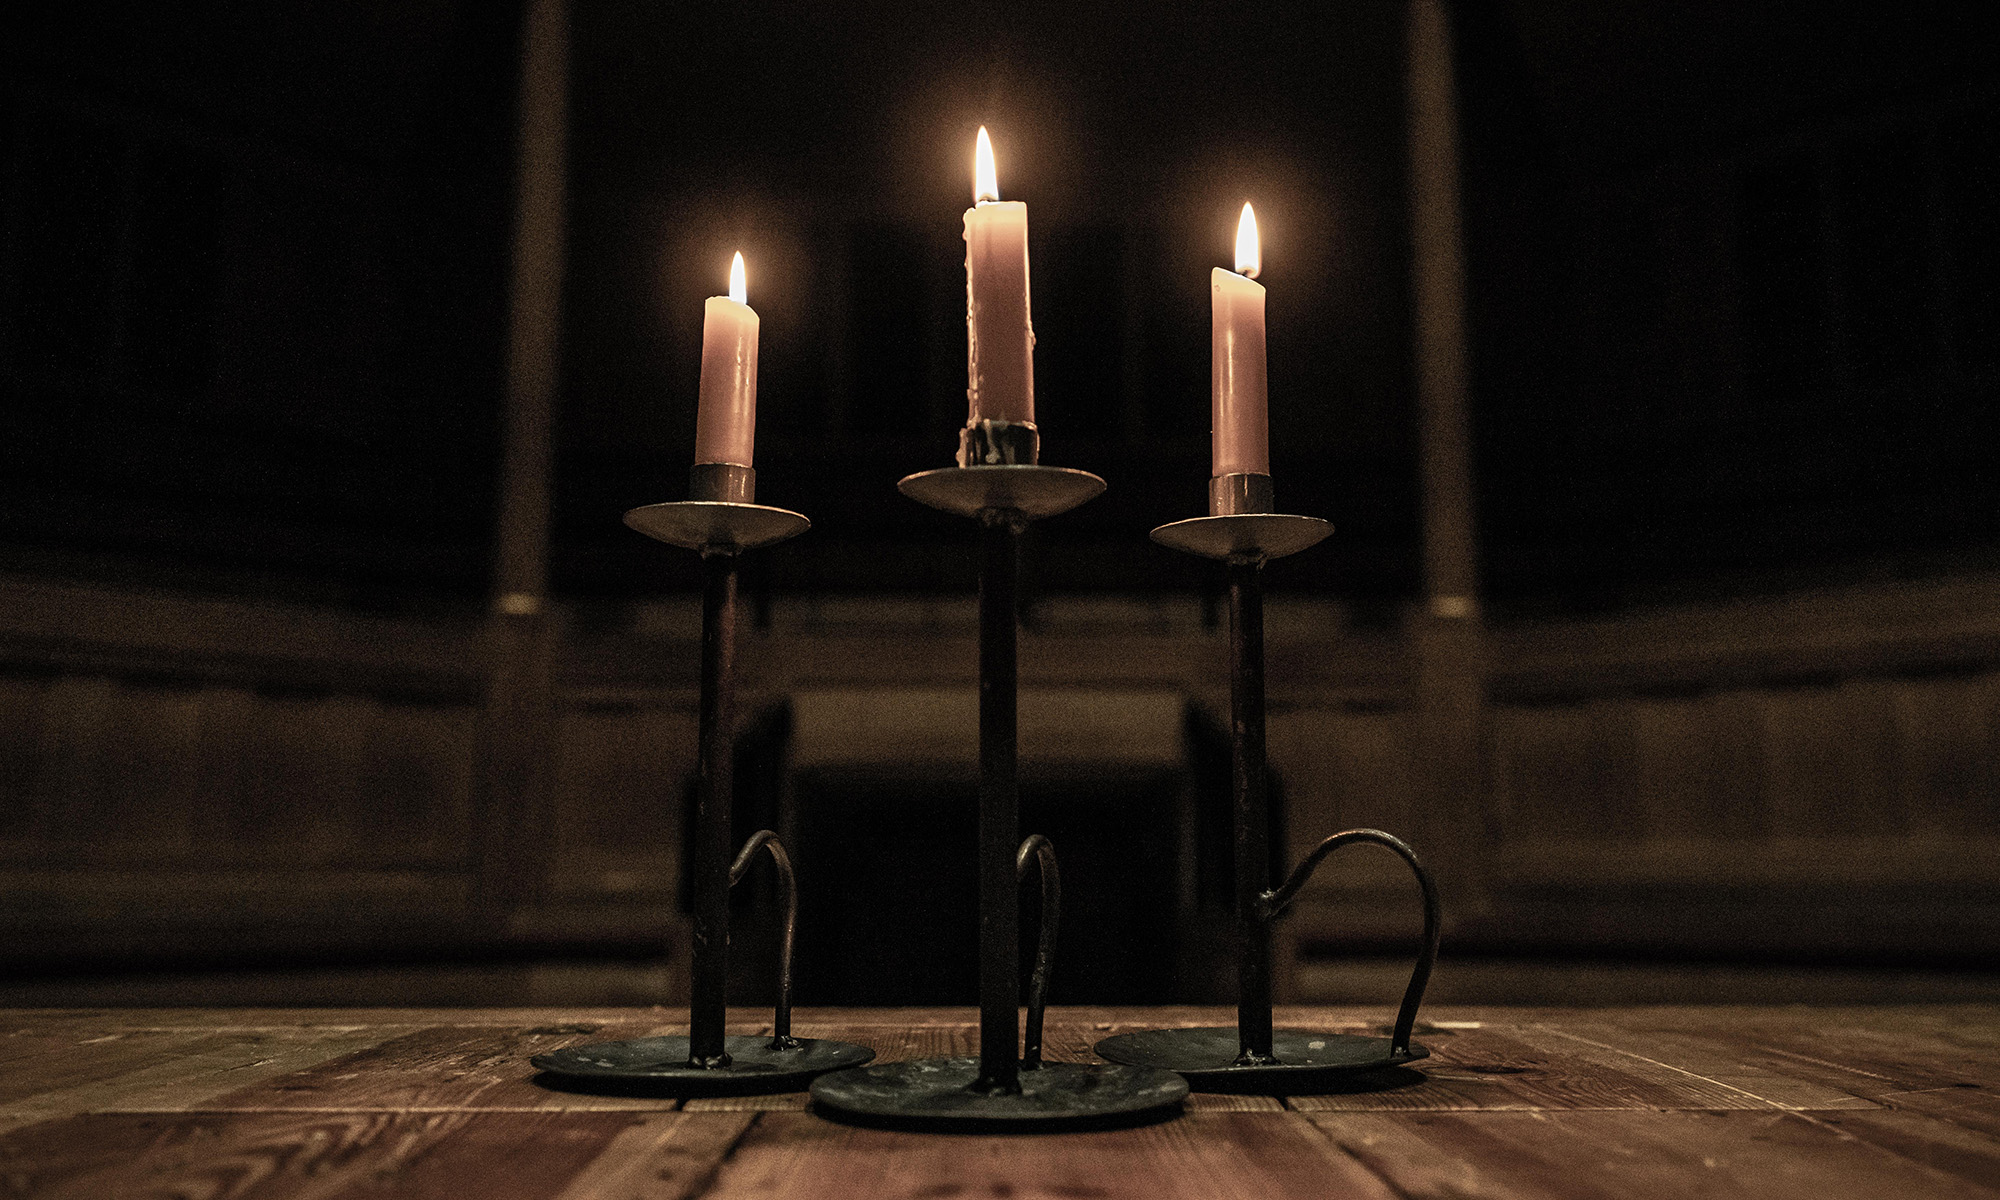 Three lit candles in the dark shadows of an indoor wooden theatre.